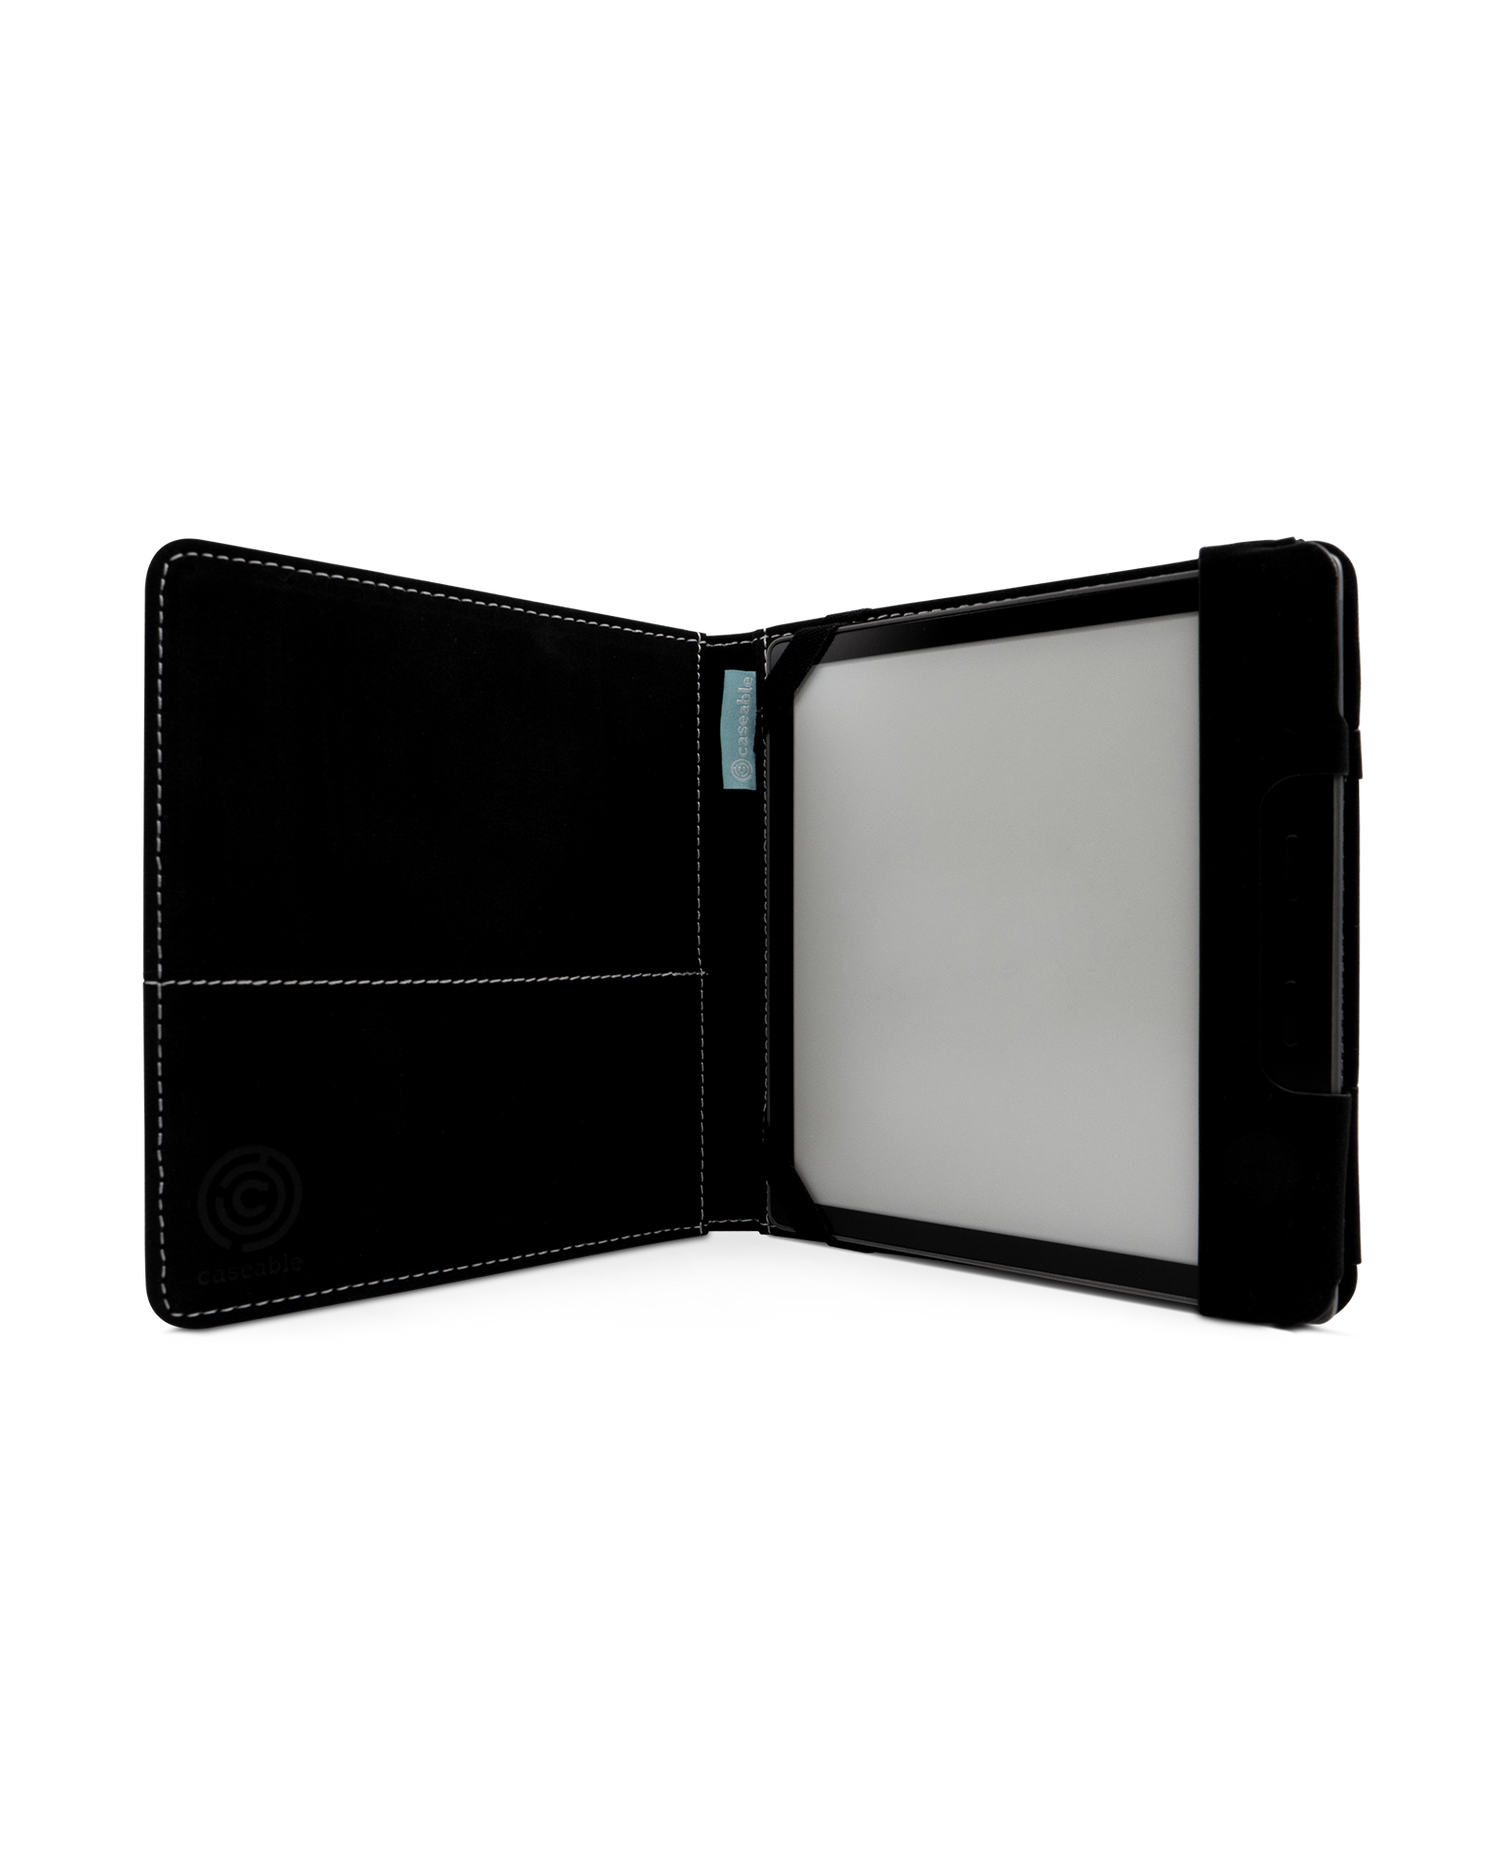 Marble Mix eReader Case for tolino vision 6: Opened interior view